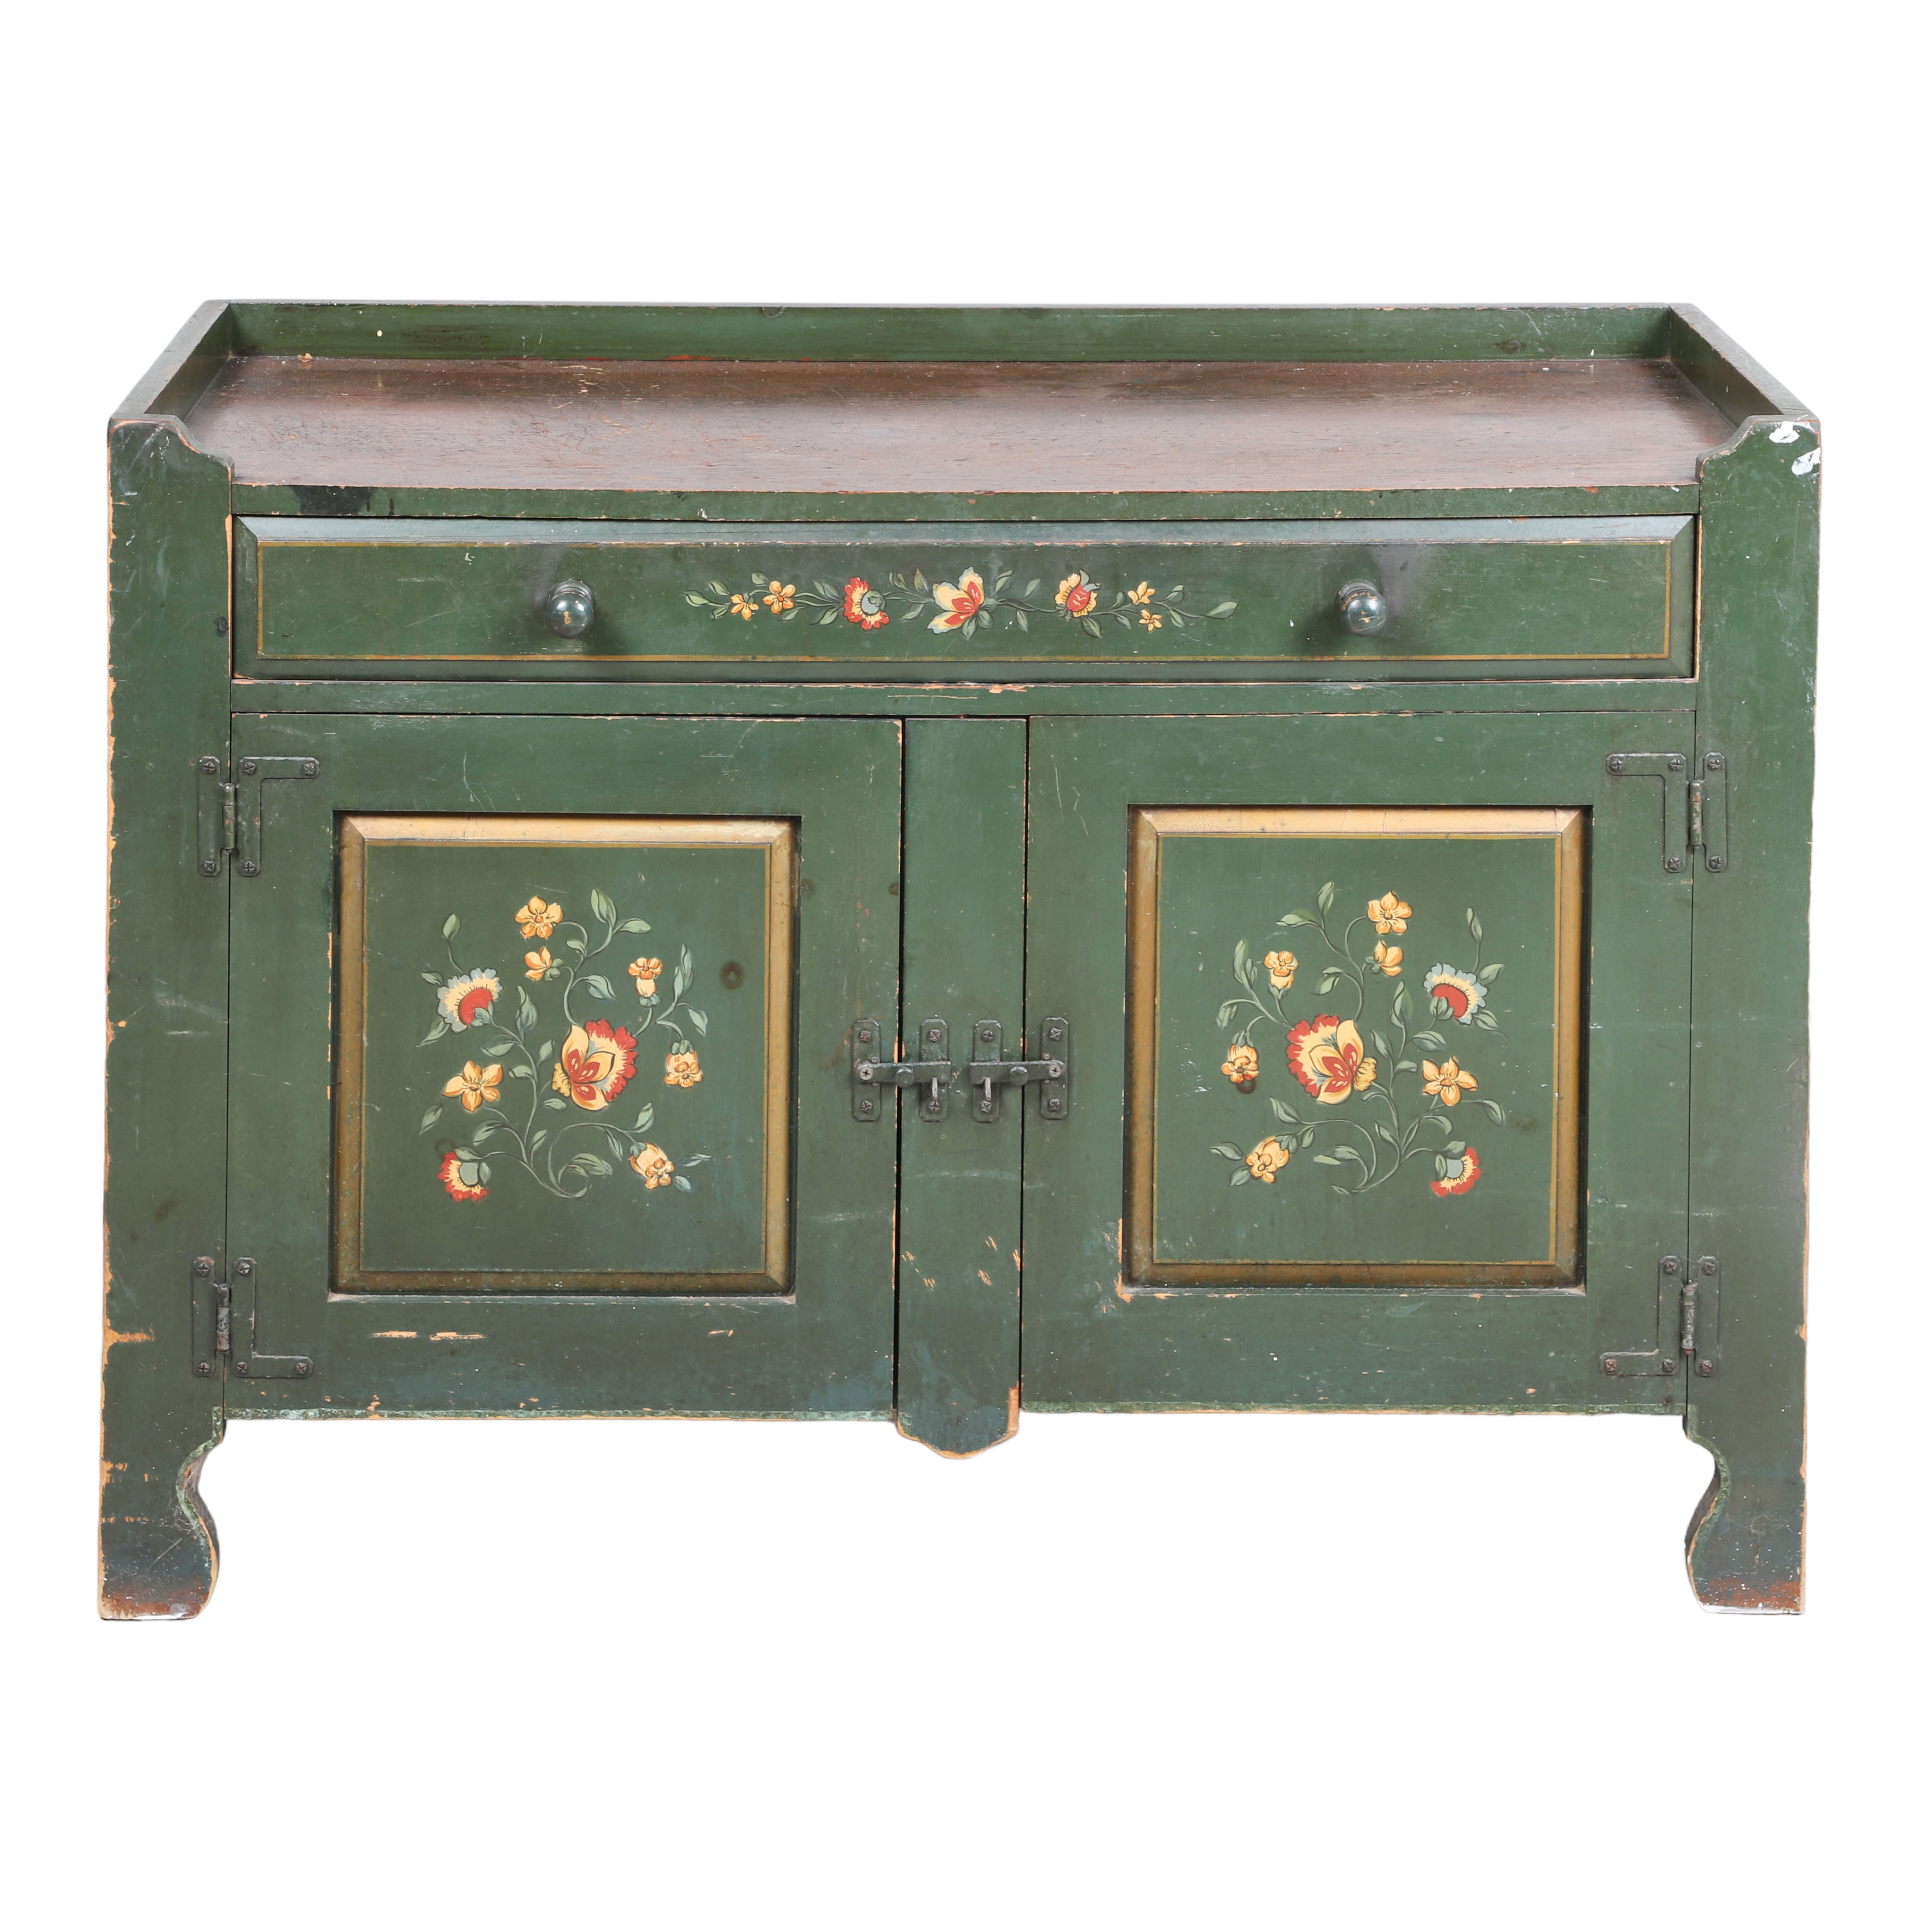 Drexel Pine paint decorated washstand  2e2148